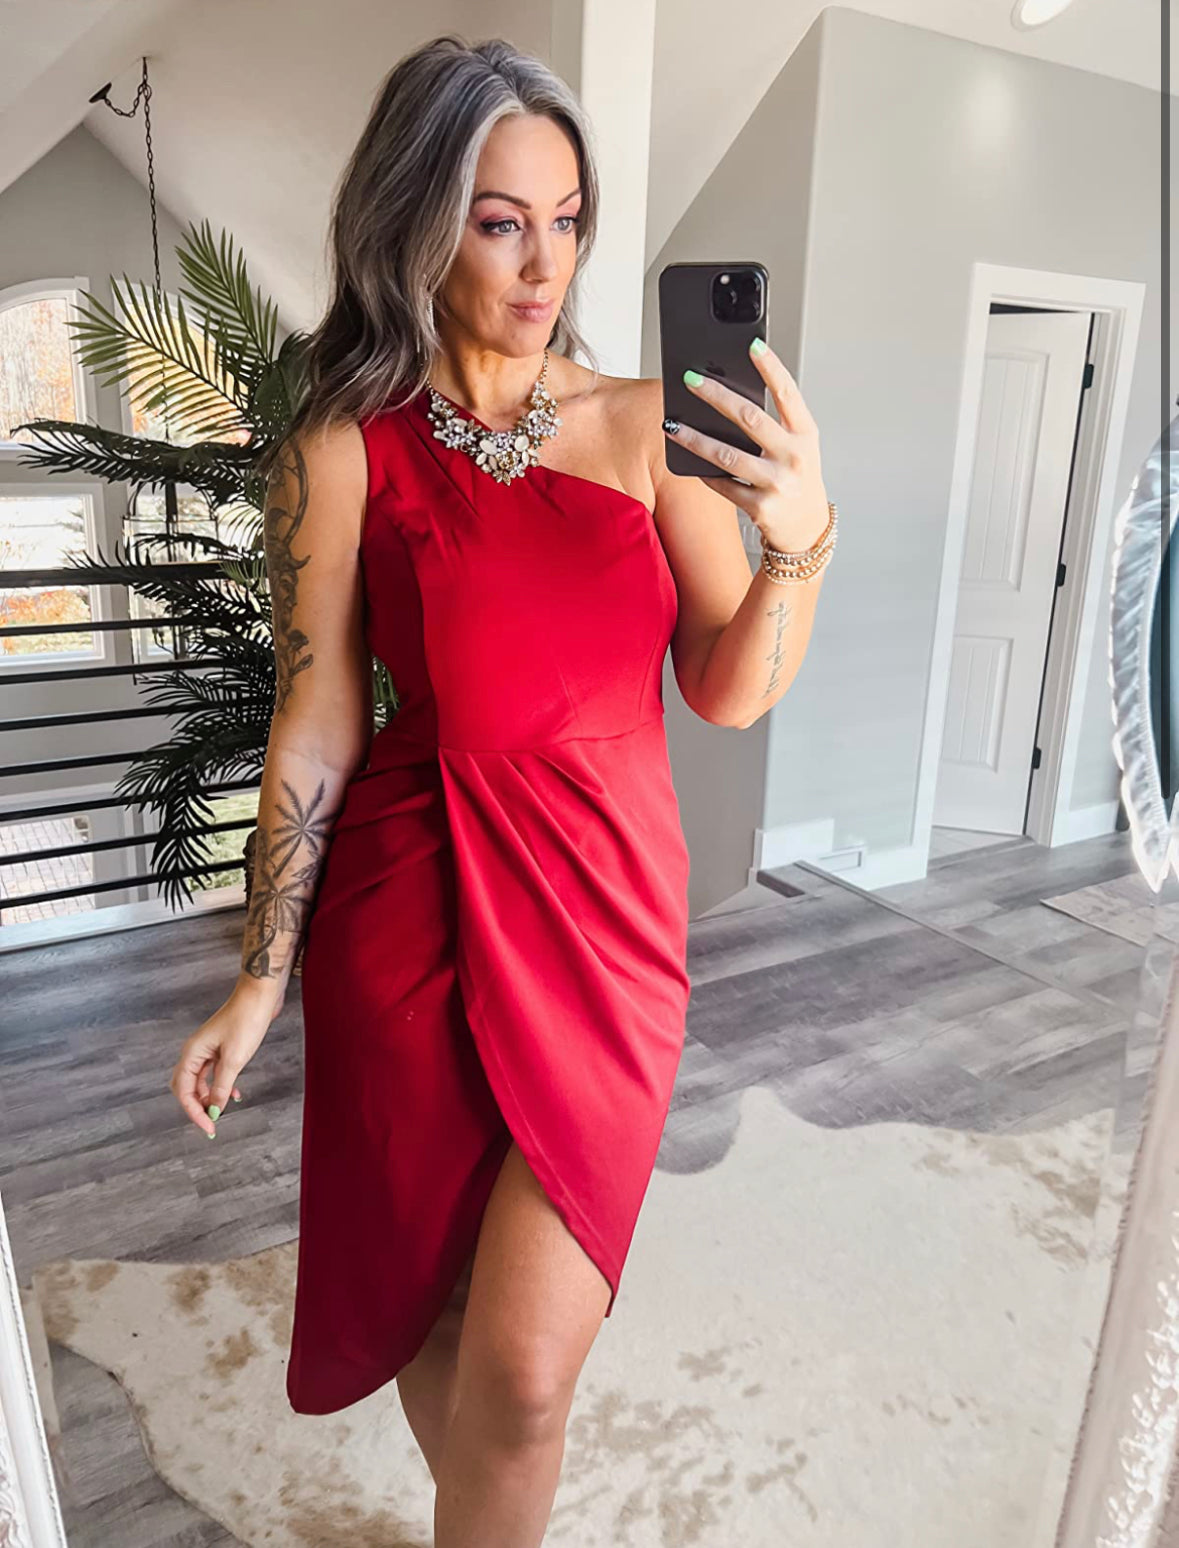 New Red One Shoulder Cutout Cocktail Dress Size Medium